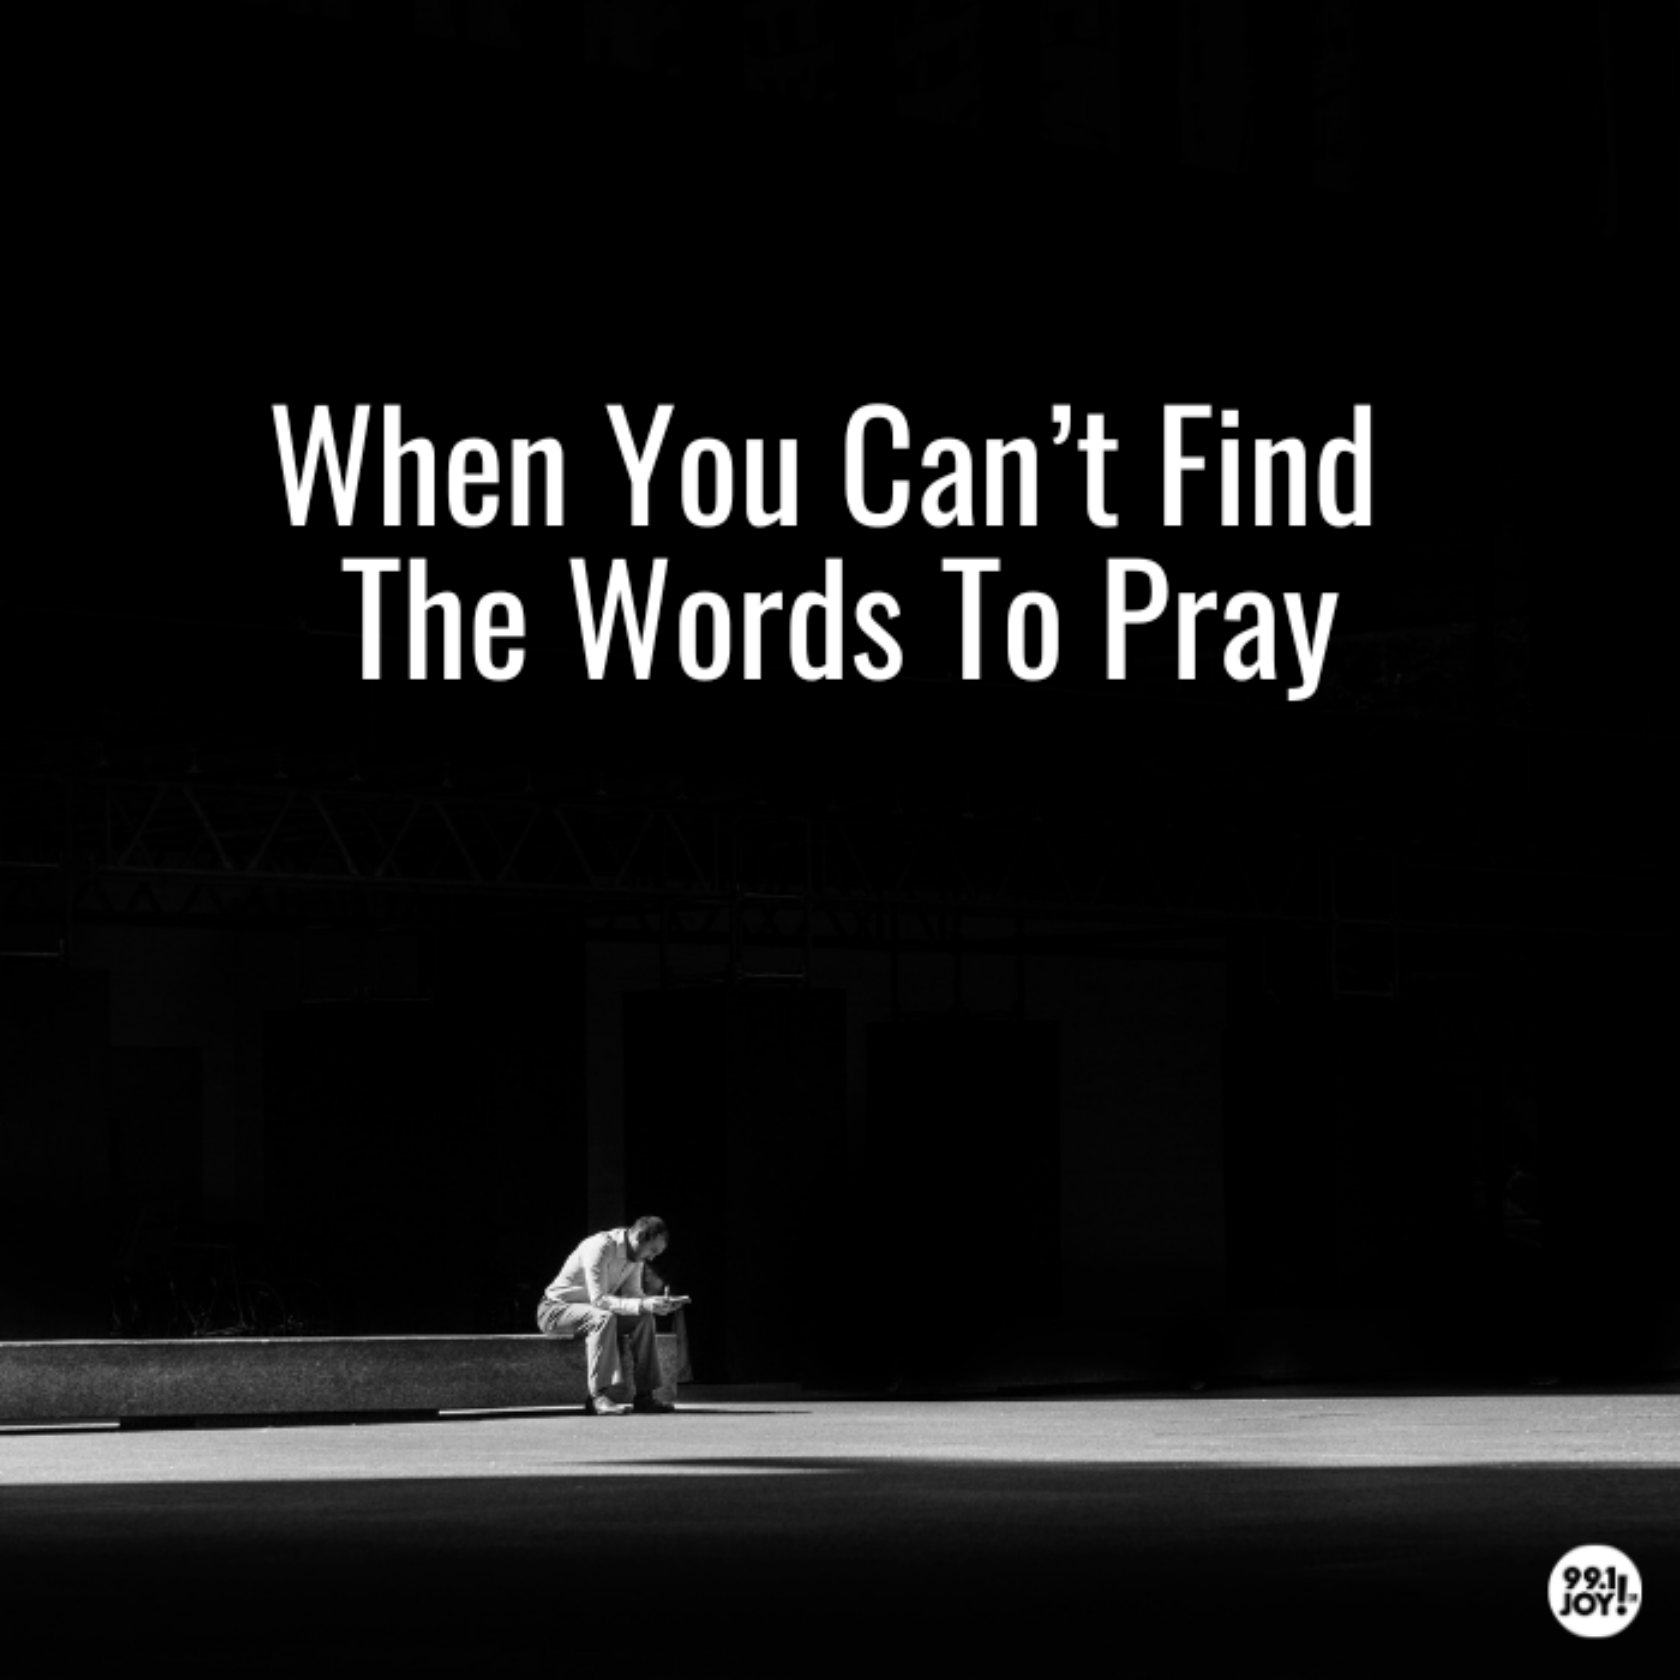 When You Can’t Find The Words To Pray